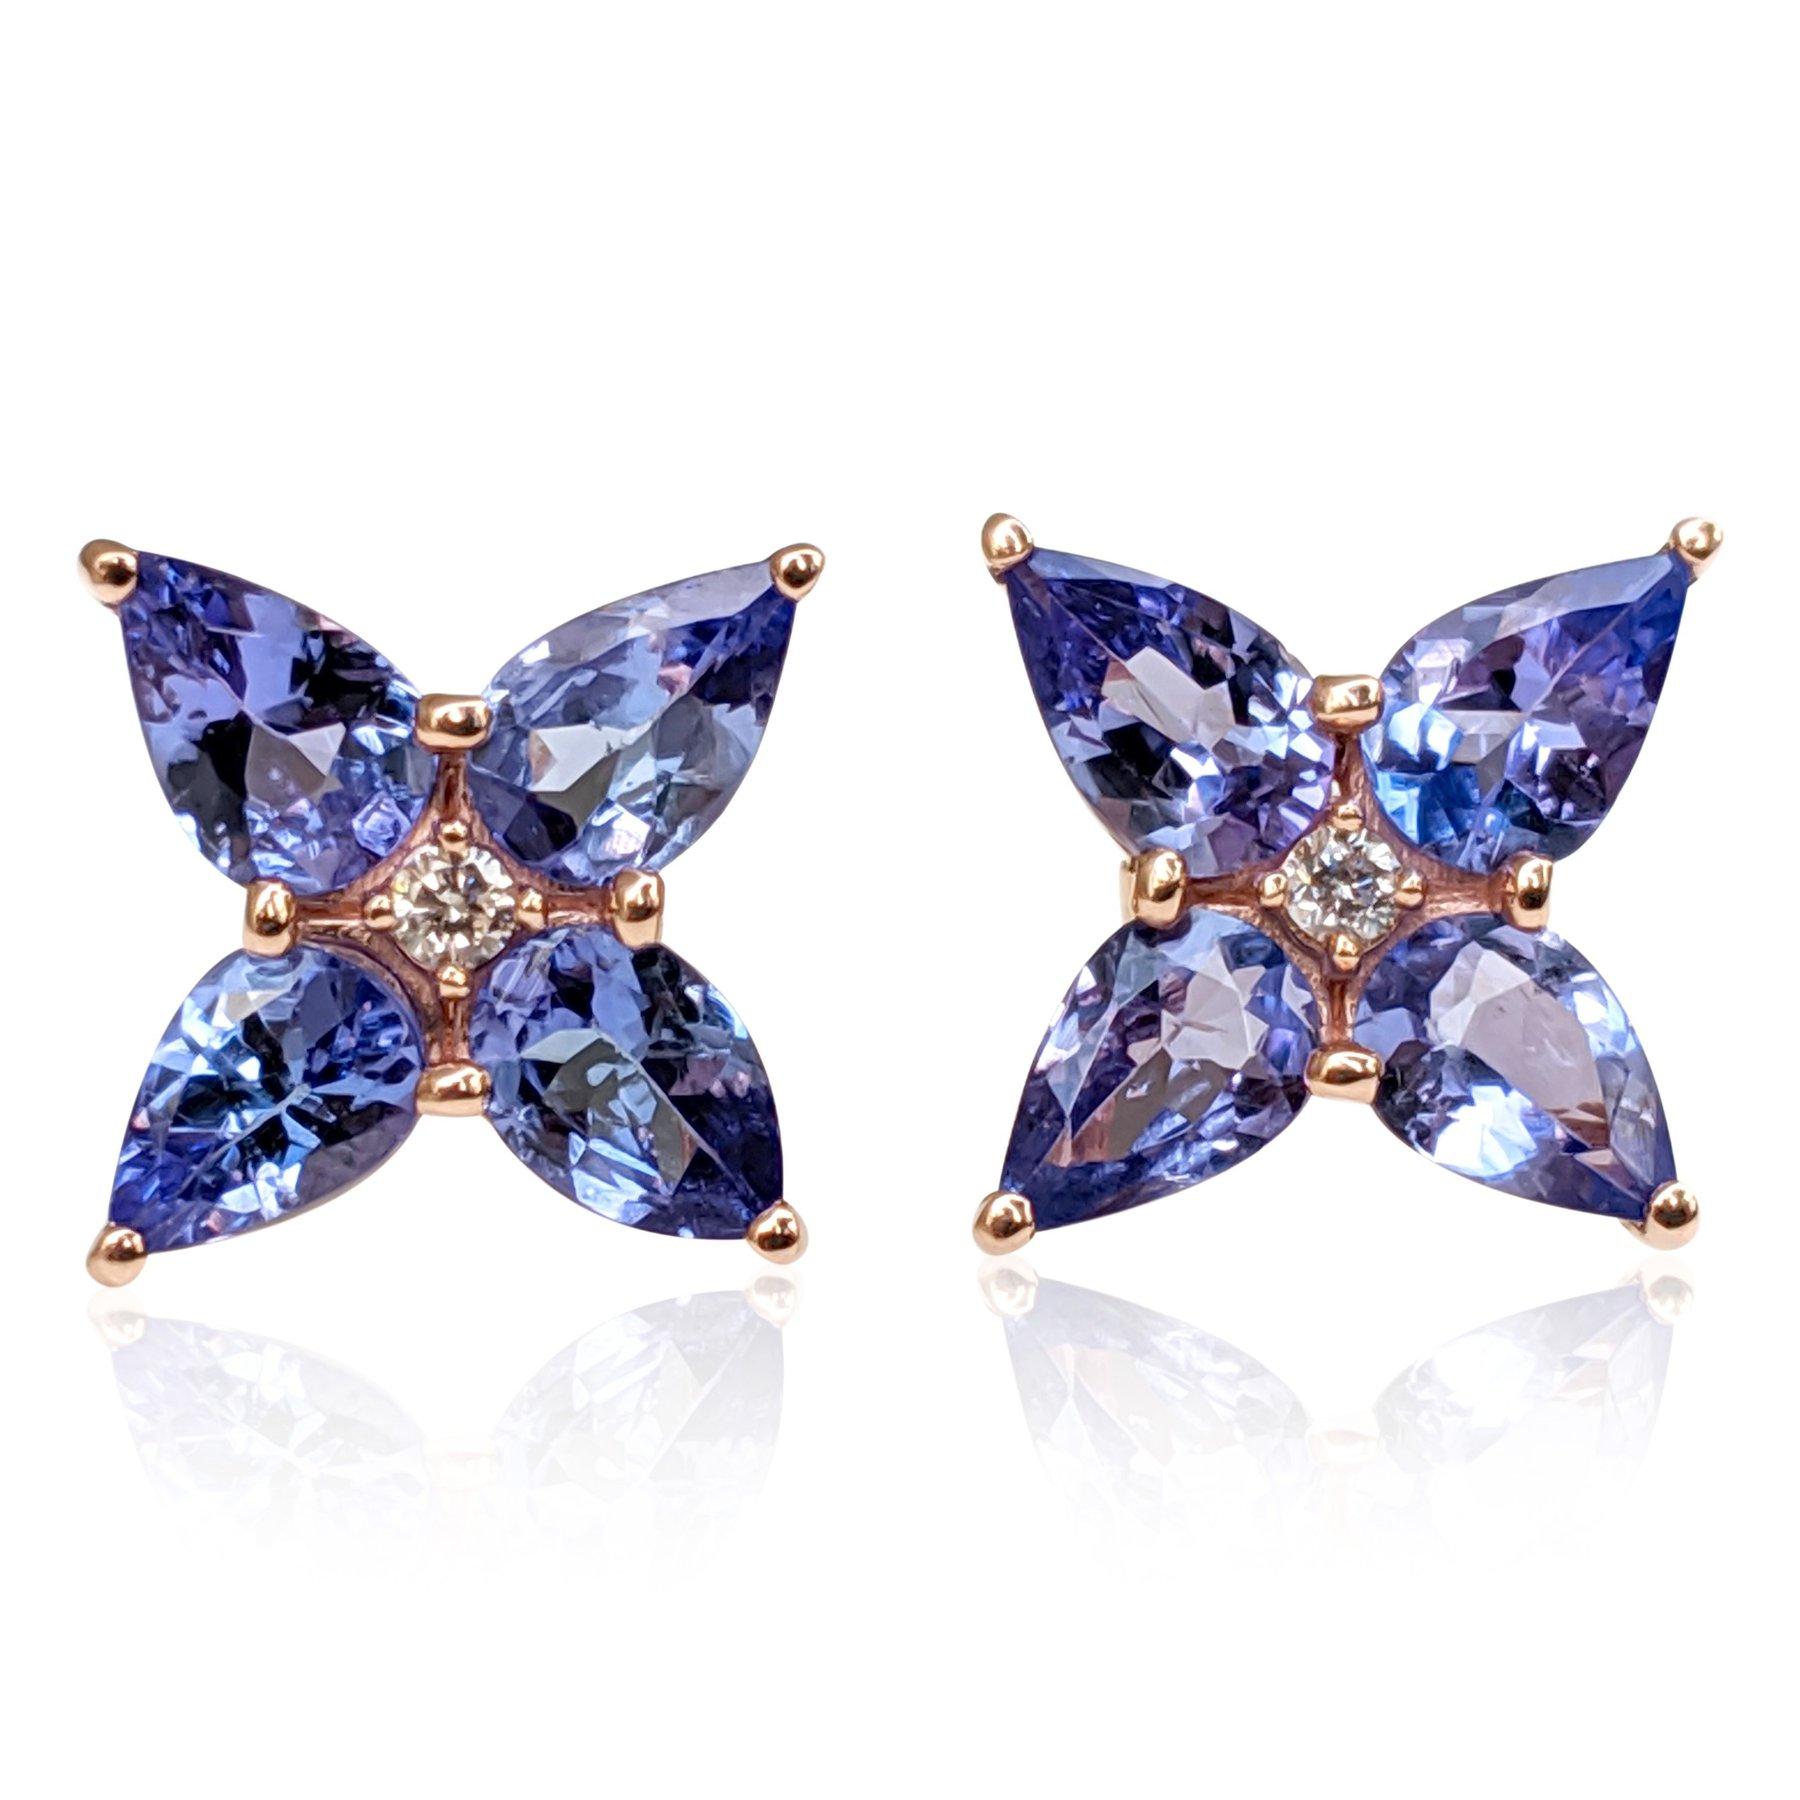 Art Deco NO RESERVE! 2.78Ct Tanzanite and 0.02Ct Diamonds - 14 kt. Pink gold - Earrings For Sale